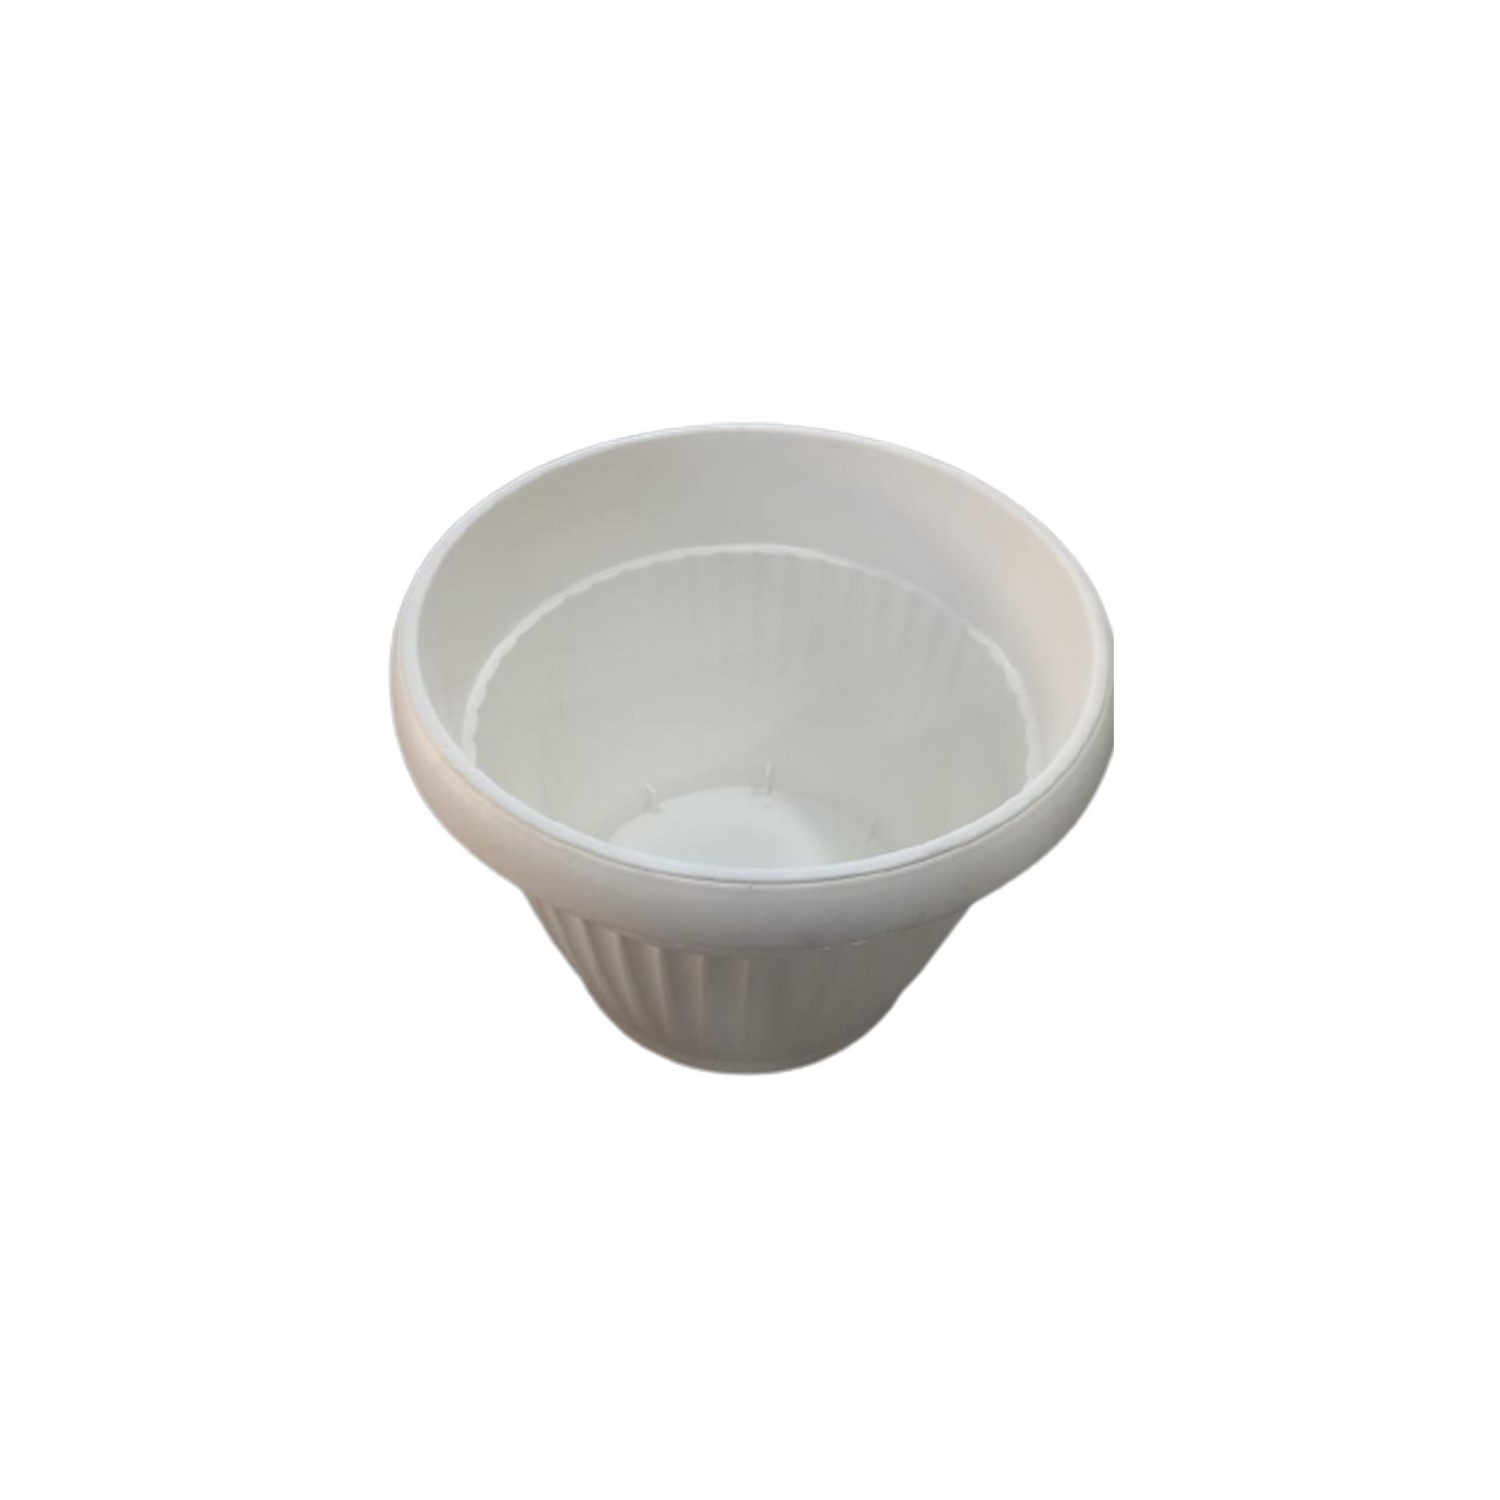 Buy Italian Pot with Base - 57cm - White Online | Agriculture Gardening Tools | Qetaat.com